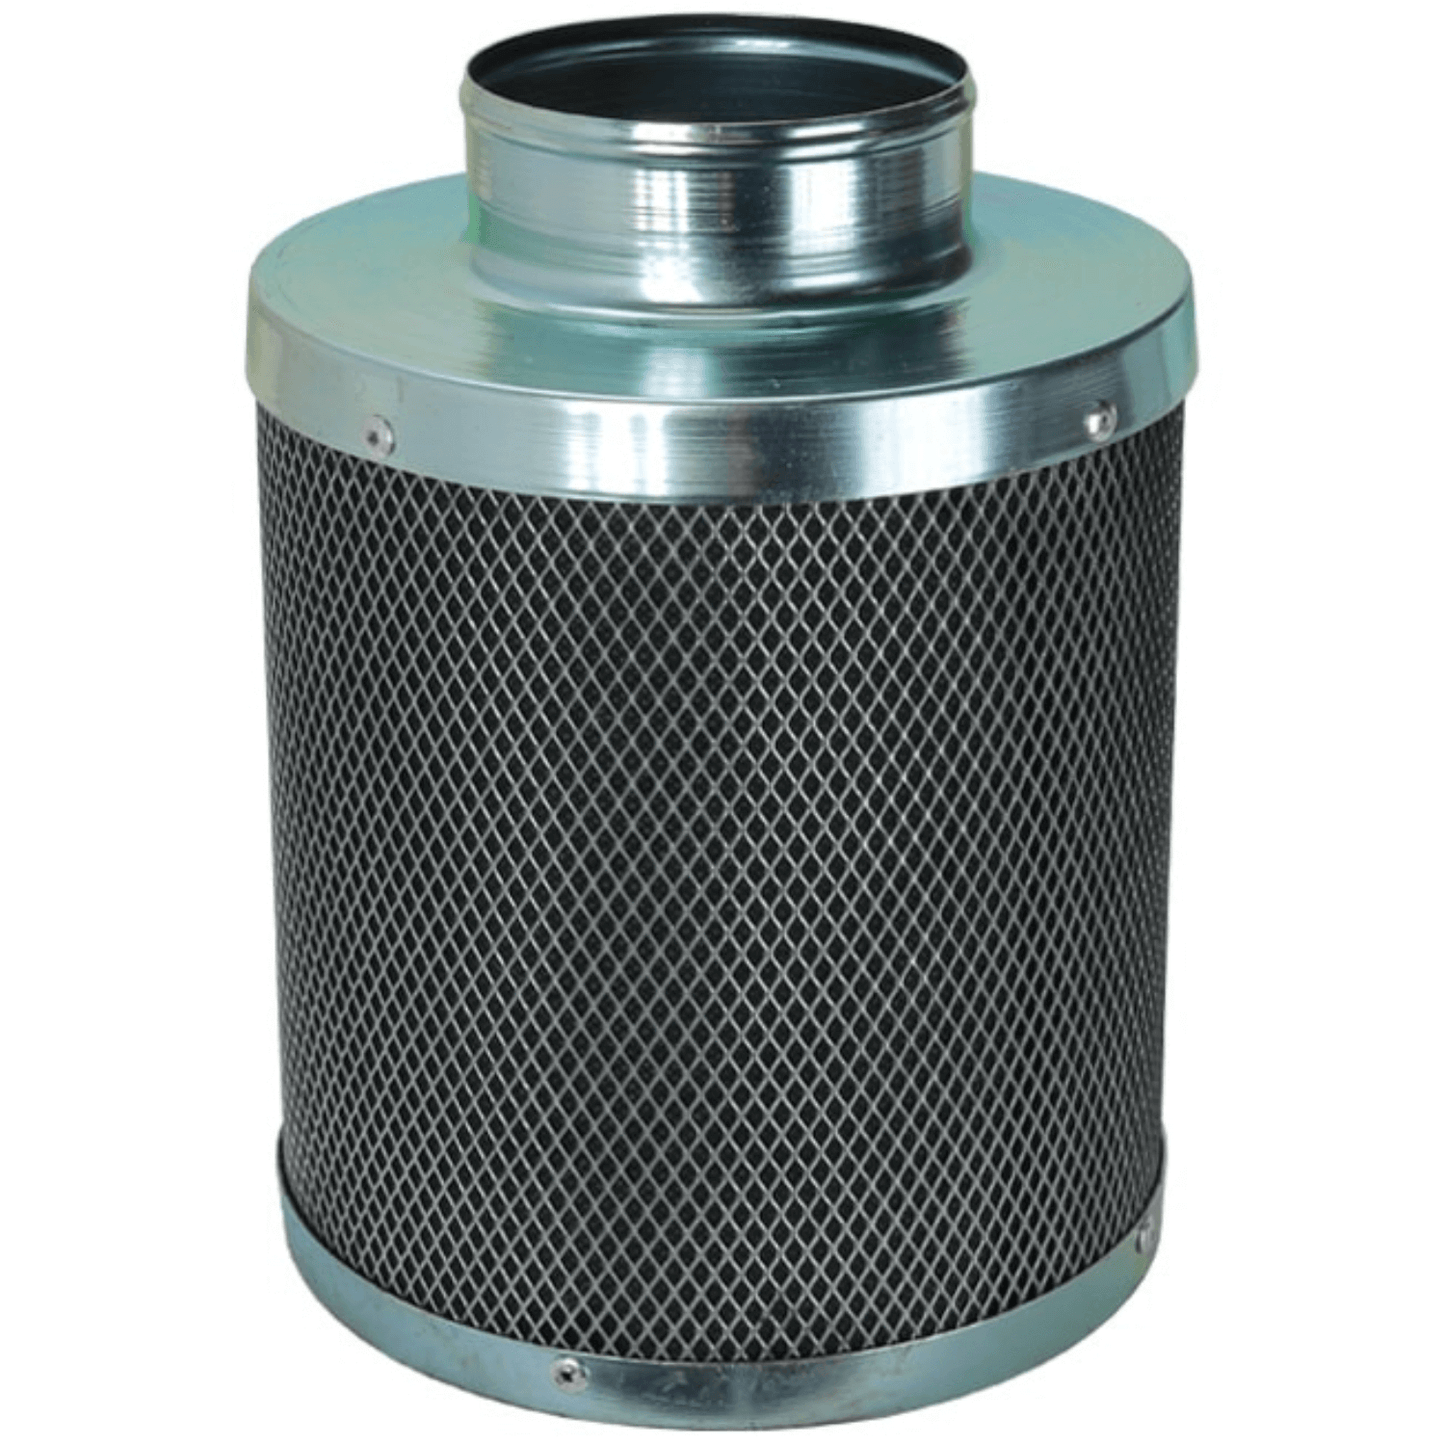 Charco Filters Plus 10" X 40" Activated Carbon Air Filter 971210-1 Climate Control 816731010085